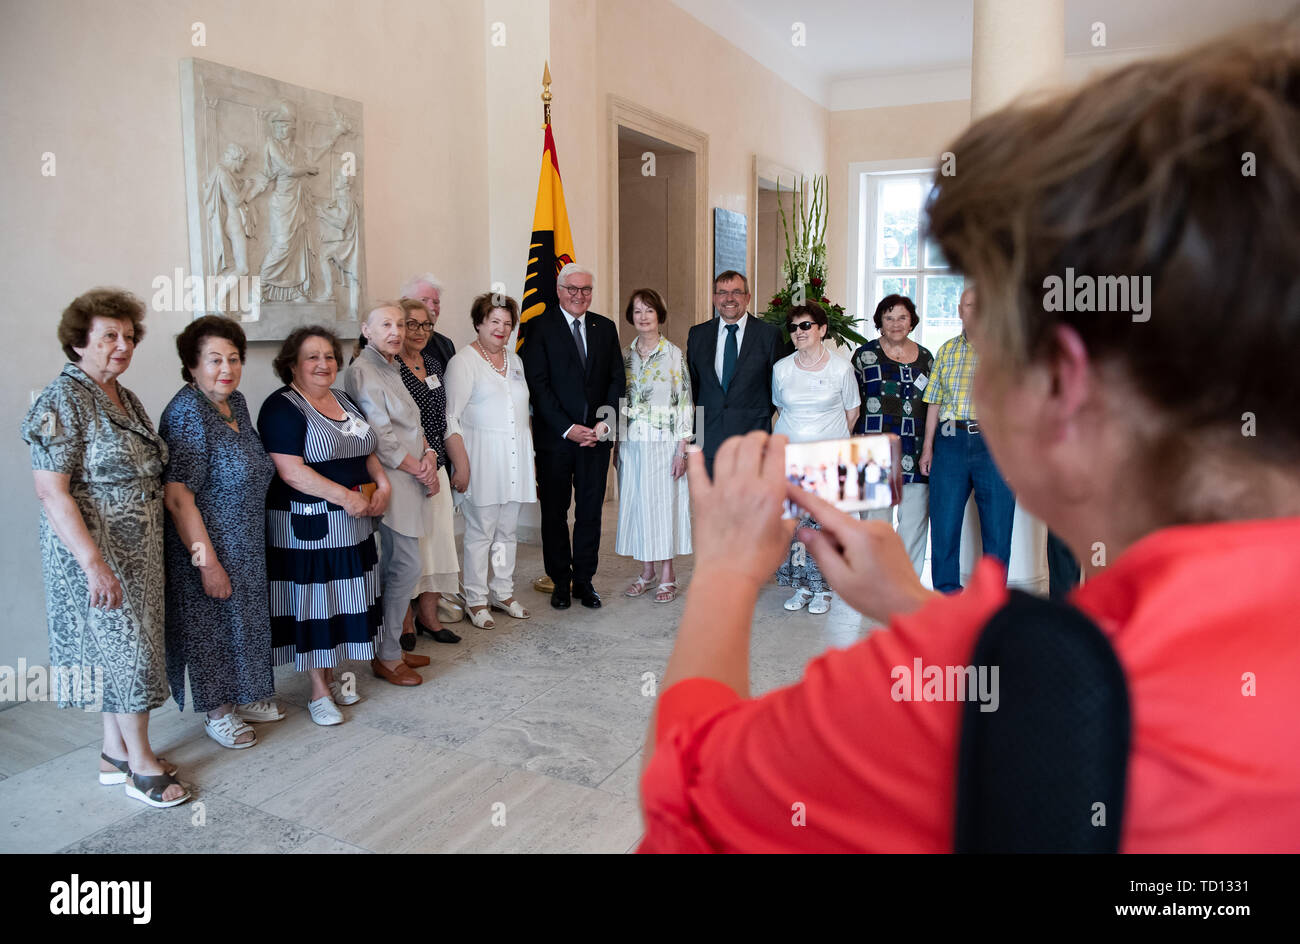 Berlin, Germany. 11th June, 2019. Federal President Frank-Walter Steinmeier welcomes Holocaust survivors from Lithuania for an interview at Bellevue Castle. The group visits Berlin at the invitation of the Maximilian-Kolbe-Werk. According to the Maximilian Kolbe plant, more than 20,000 former prisoners of German concentration camps and ghettos still live in the countries of Central and Eastern Europe. Credit: Bernd von Jutrczenka/dpa/Alamy Live News Stock Photo